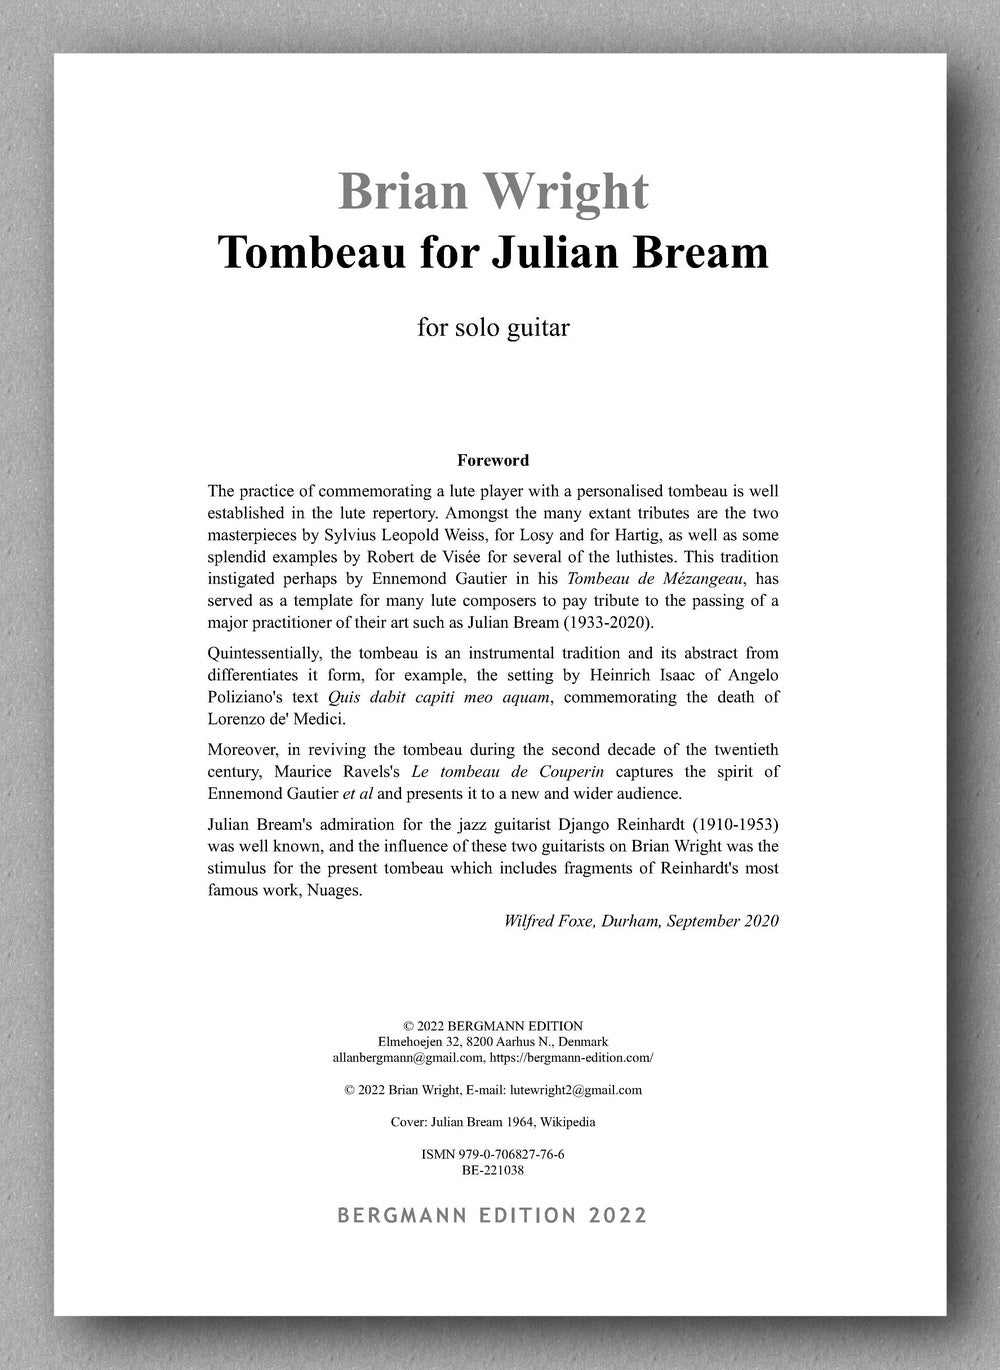 Brian Wright, Tombeau for Julian Bream - preview of the  foreword